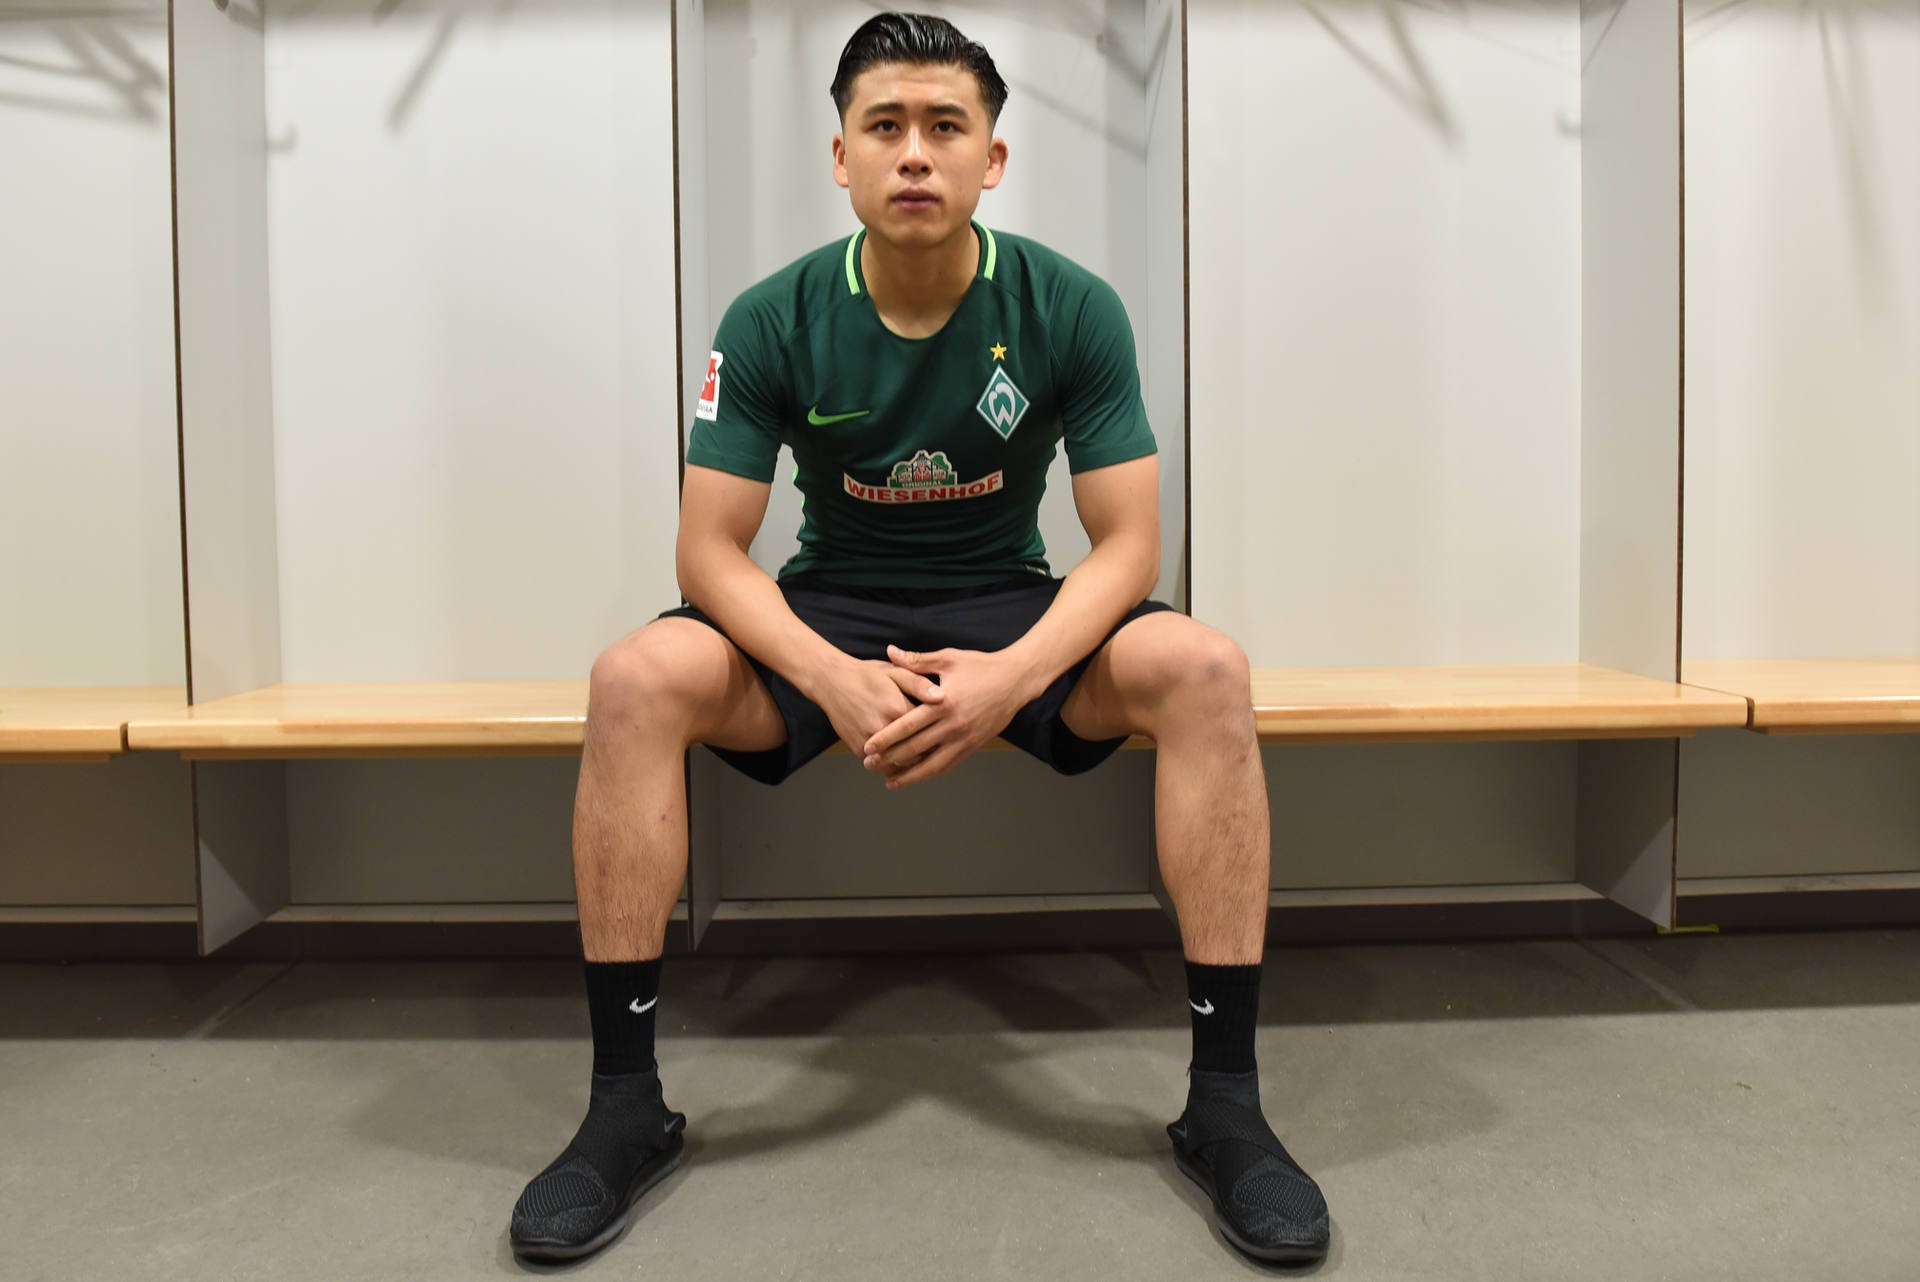 Zhang Yuning in the Werder Bremen dressing room. The Chinese youngster signed for West Bromwich Albion then immediately moved to the German team on loan. Photo: Werder Bremen / Werder.de